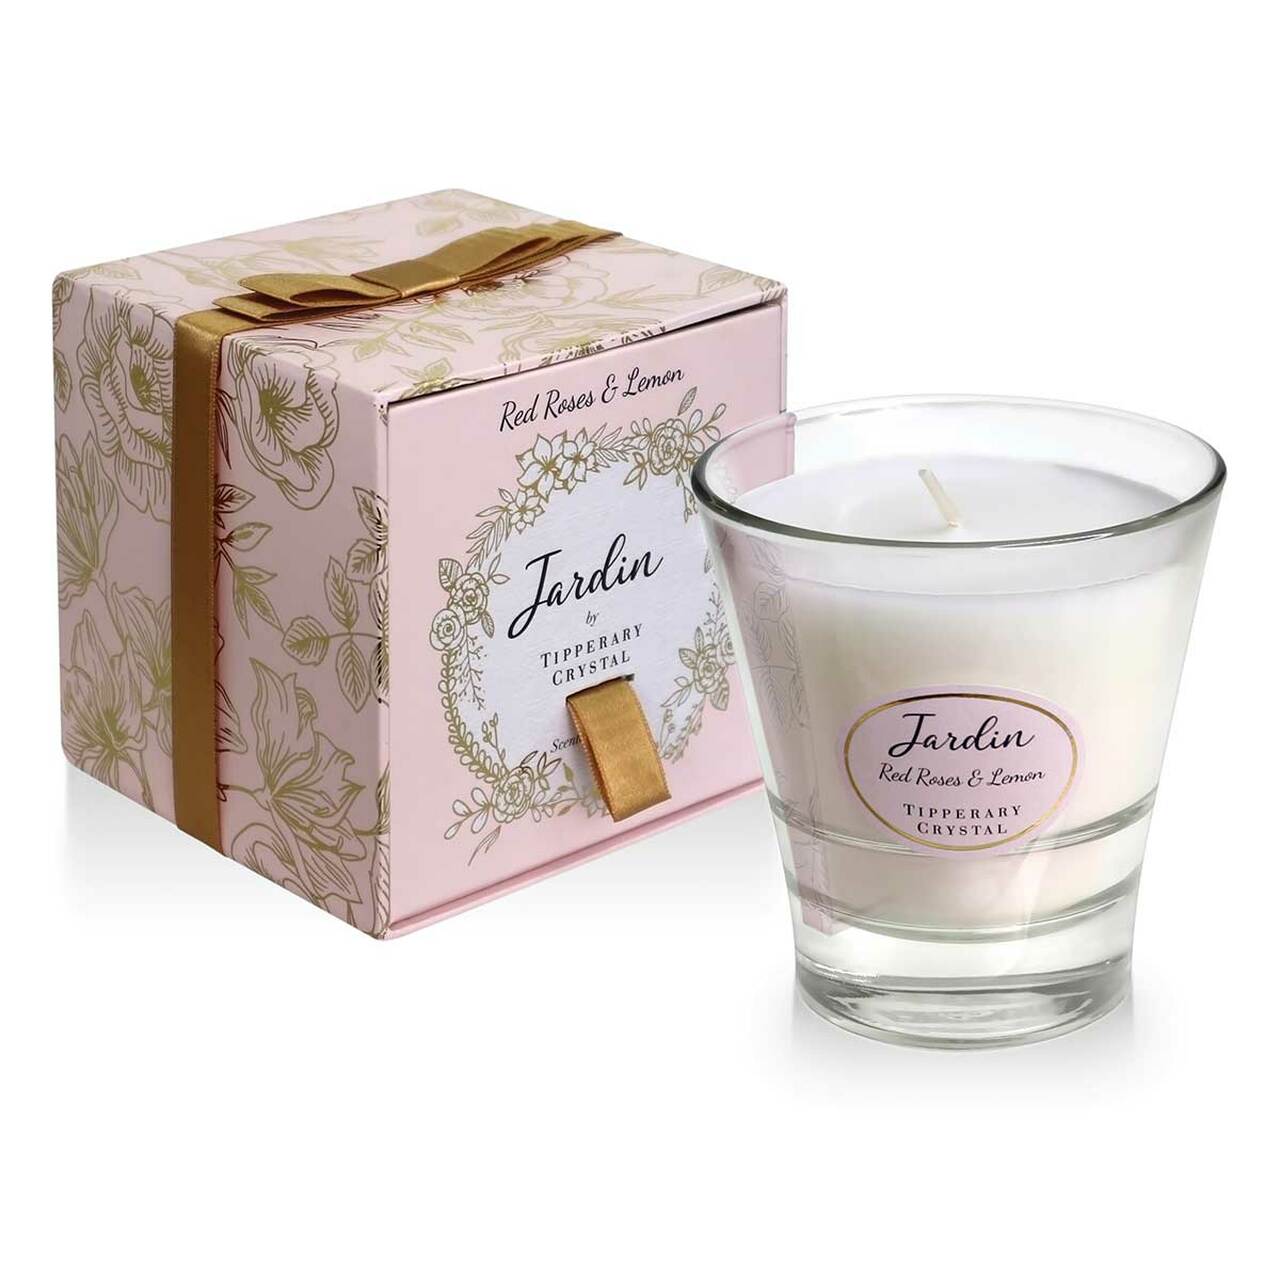 Tipperary Crystal Red Roses & Lemon Jardin Collection Candle